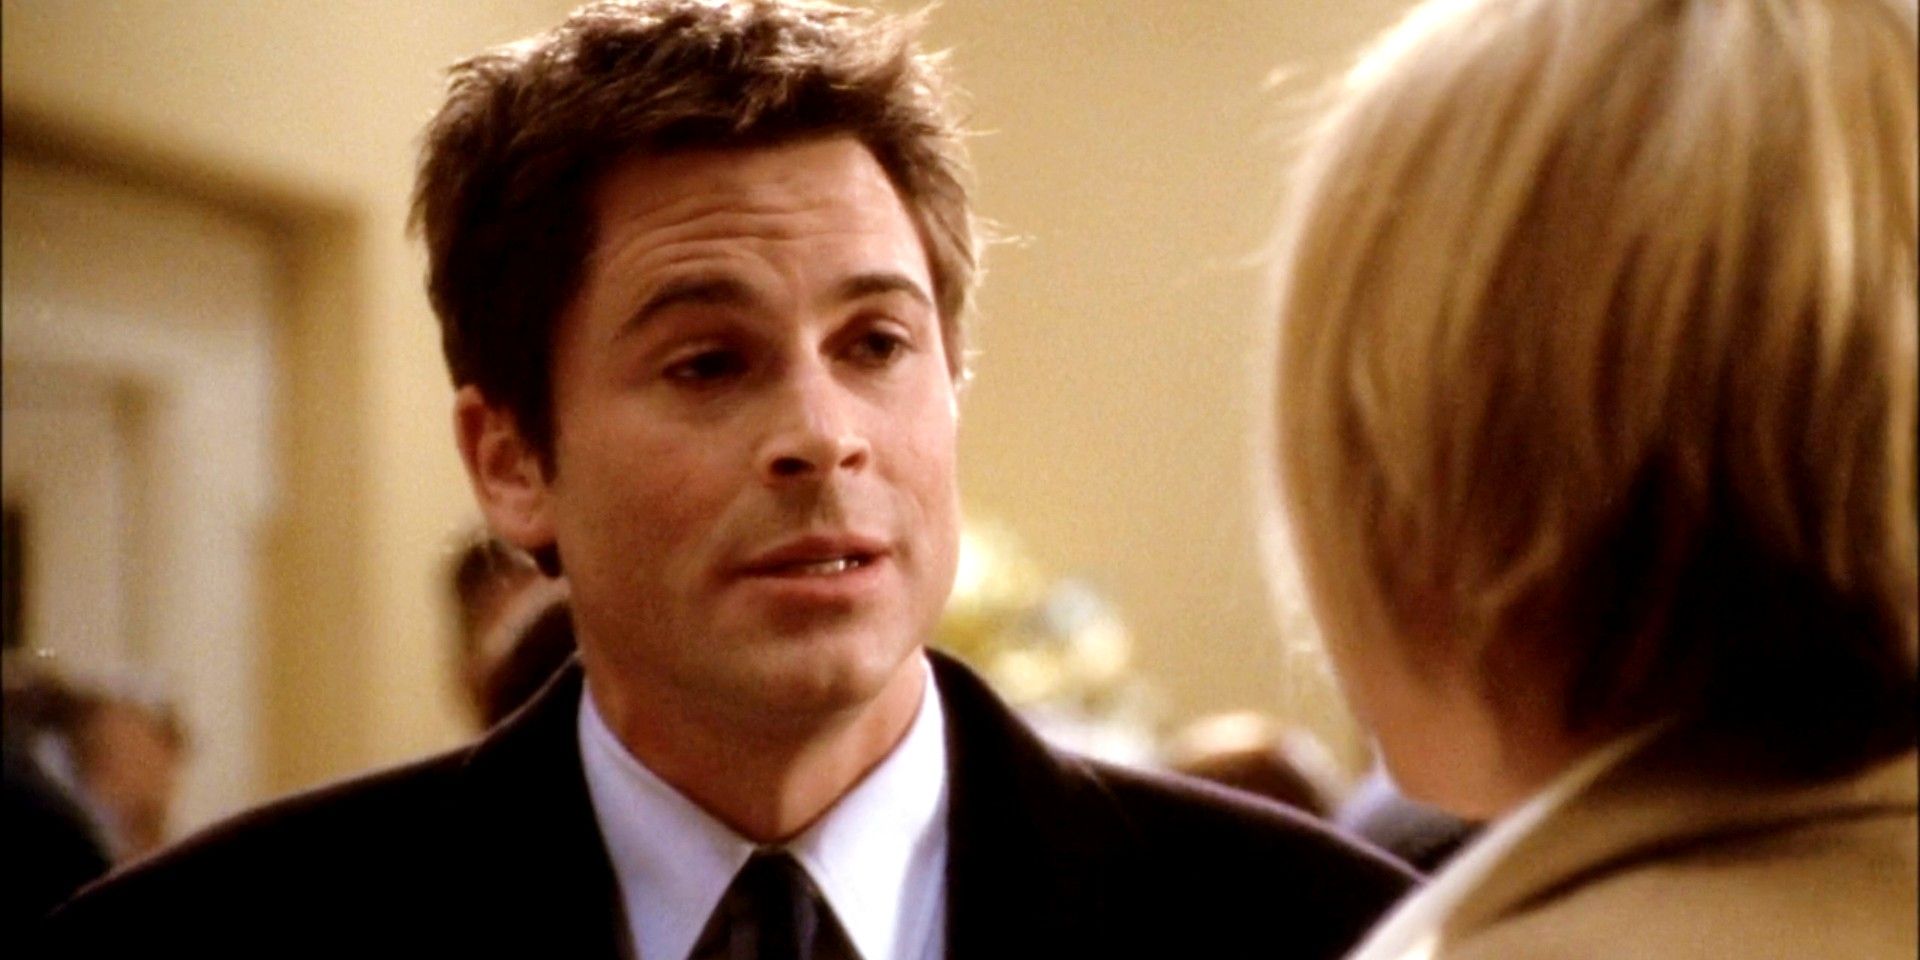 Rob Lowe as Sam Seaborn in The West Wing season 3